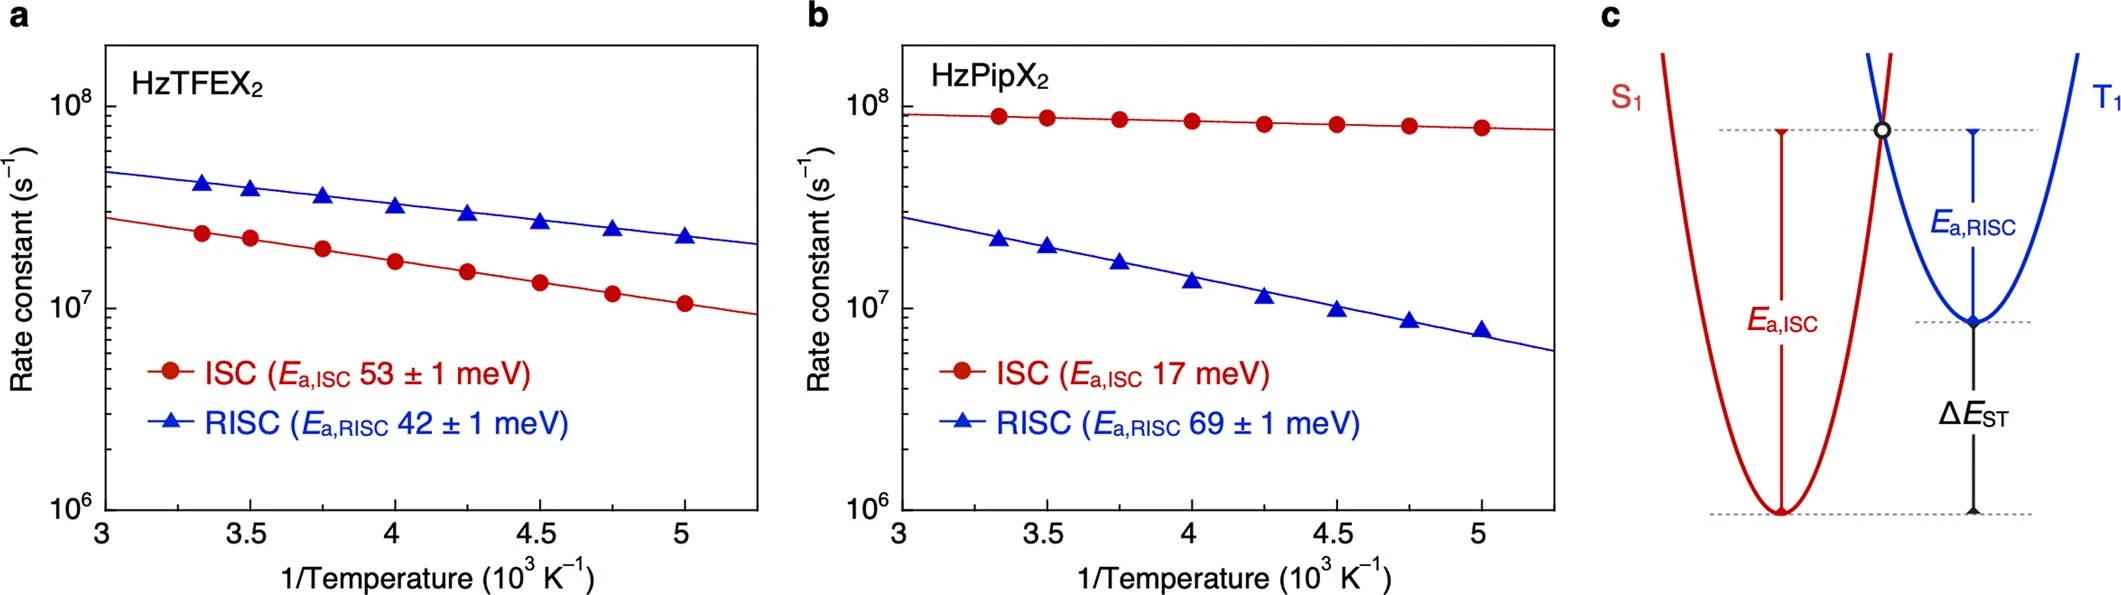 Extended Data Fig. 3: kISC and kRISC of HzTFEX2 and HzPipX2.